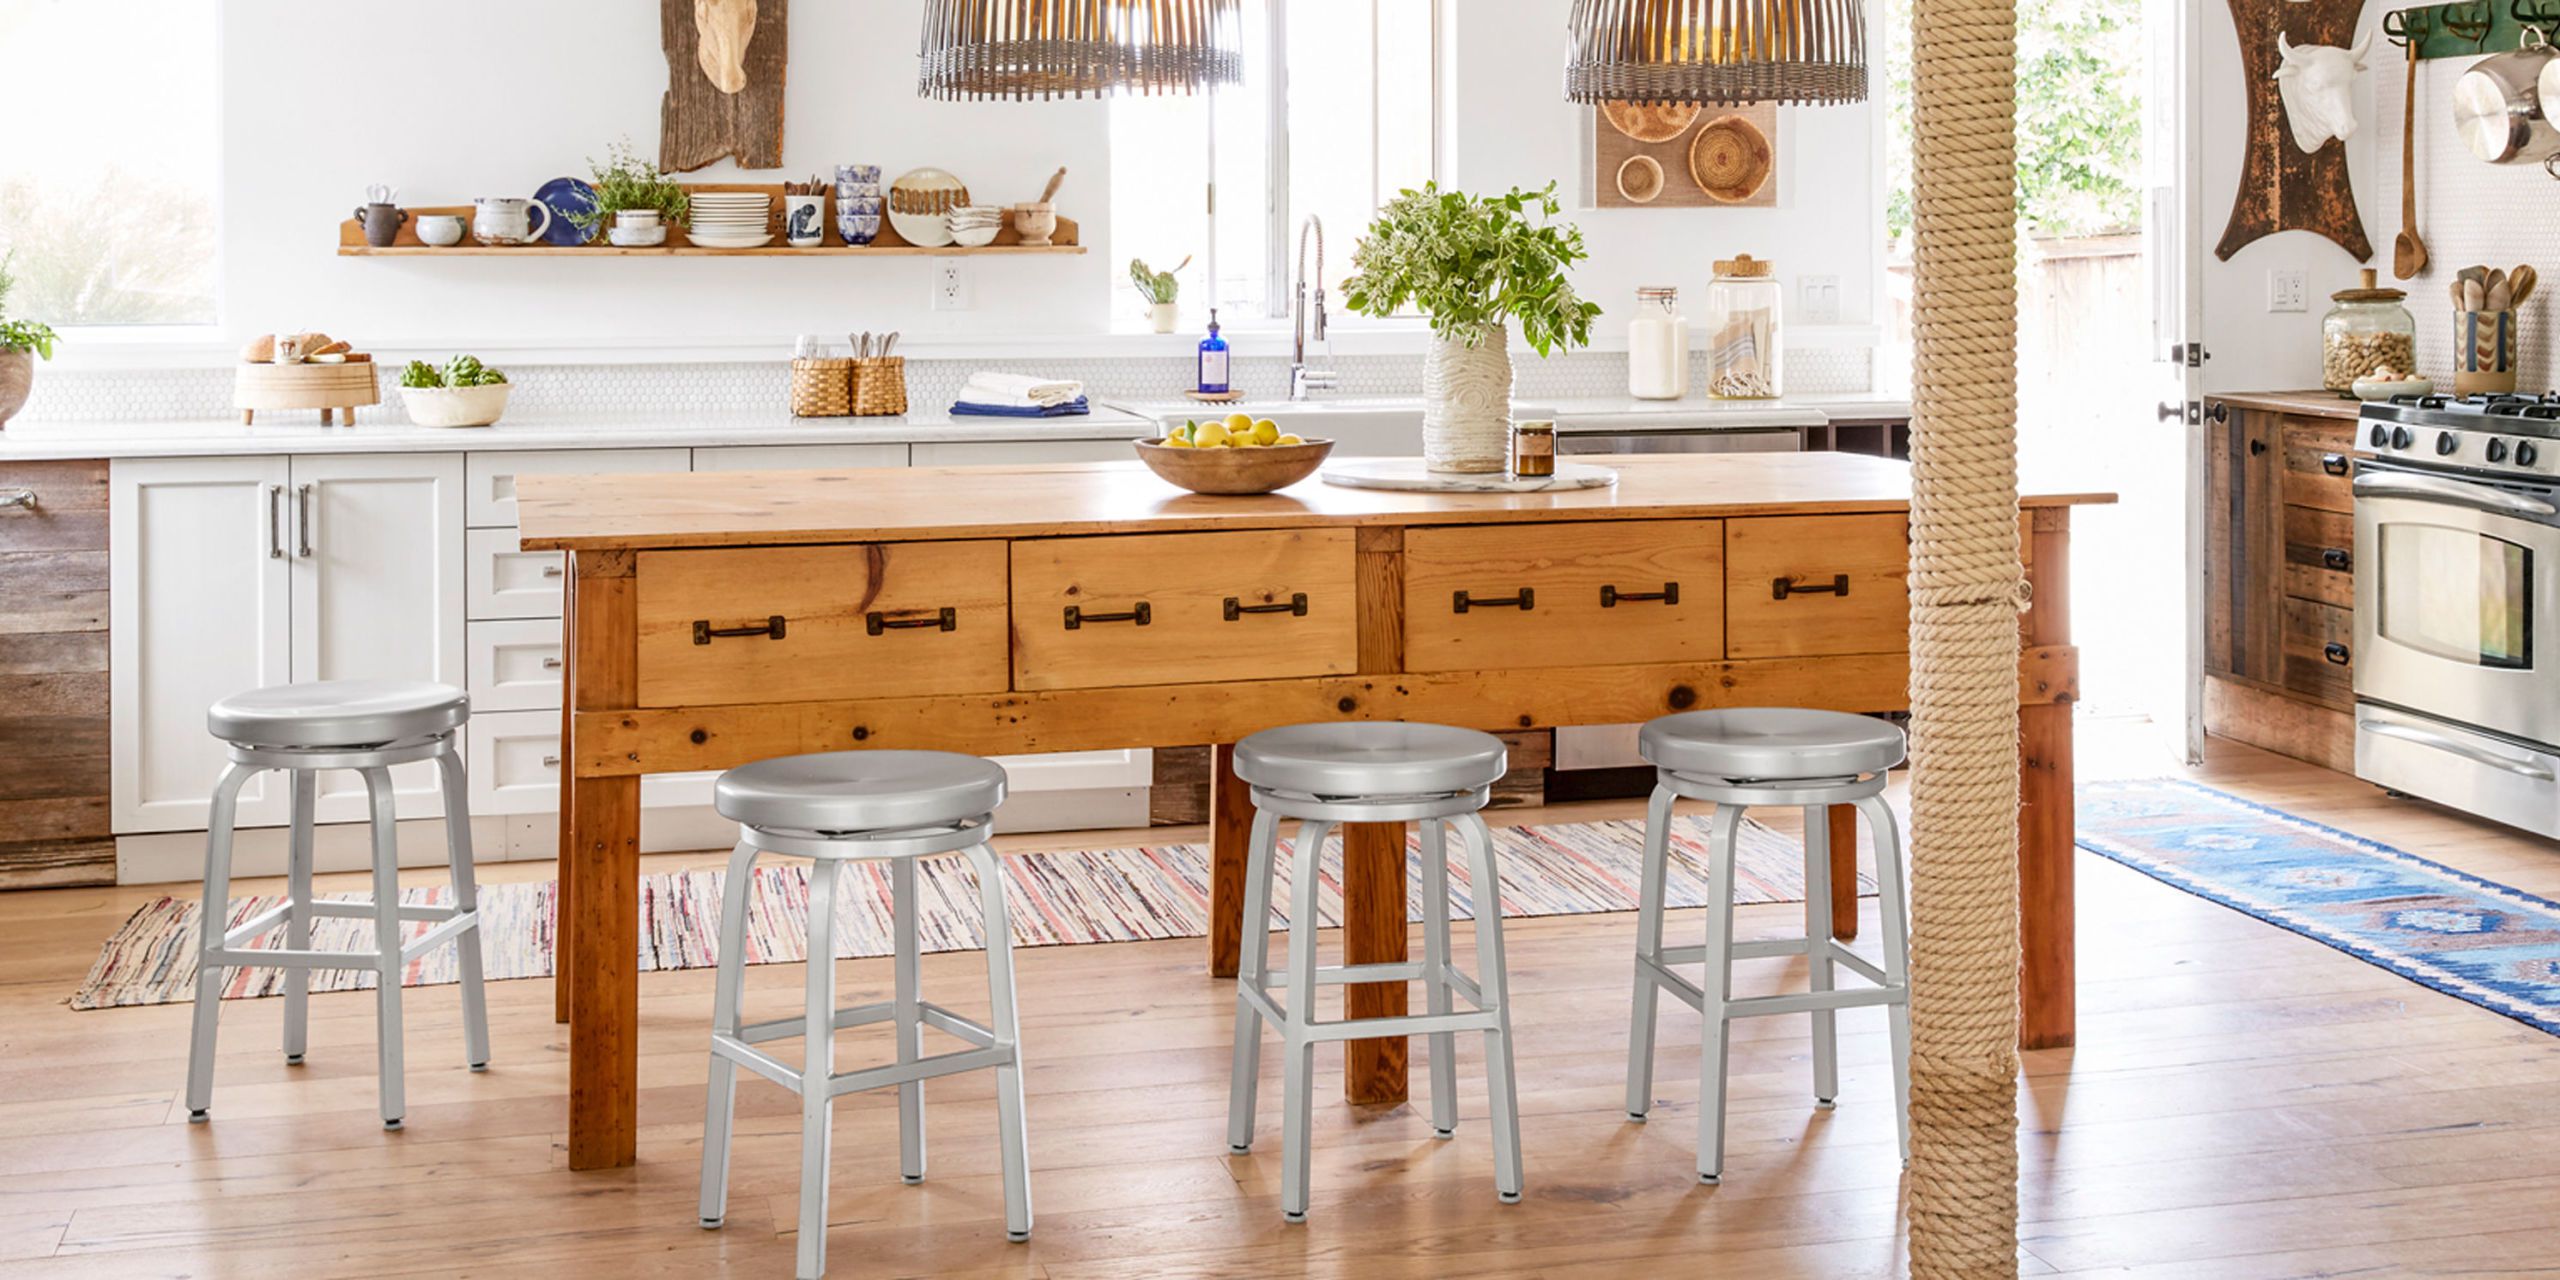 Kitchen Islands add storage, style, and extra seating with a standalone kitchen island. OEUTOUT